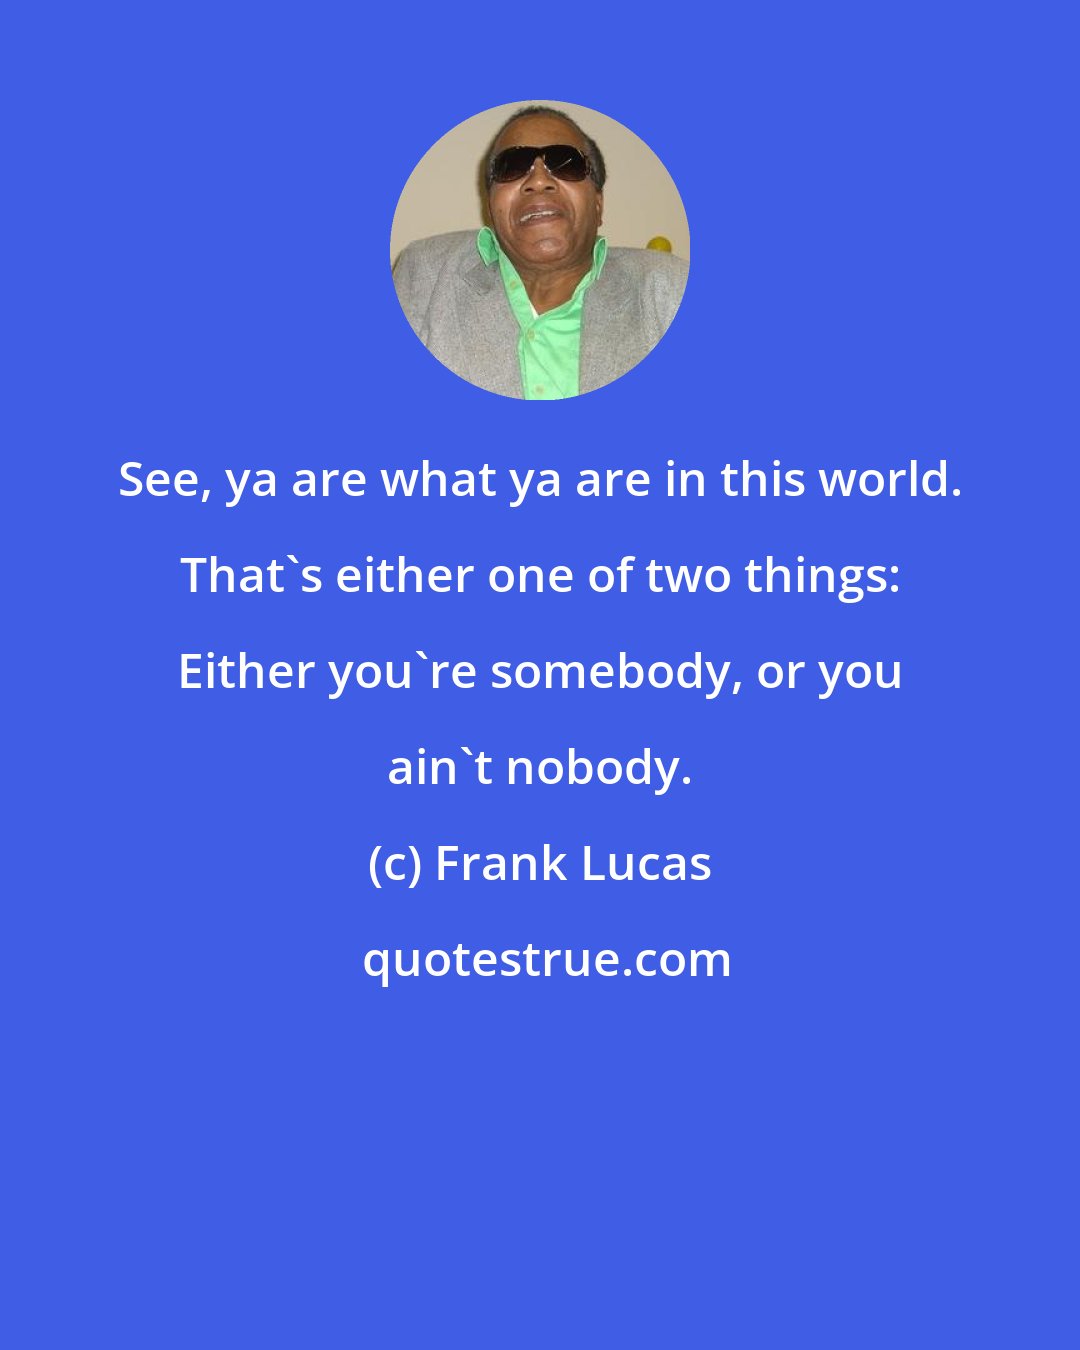 Frank Lucas: See, ya are what ya are in this world. That's either one of two things: Either you're somebody, or you ain't nobody.